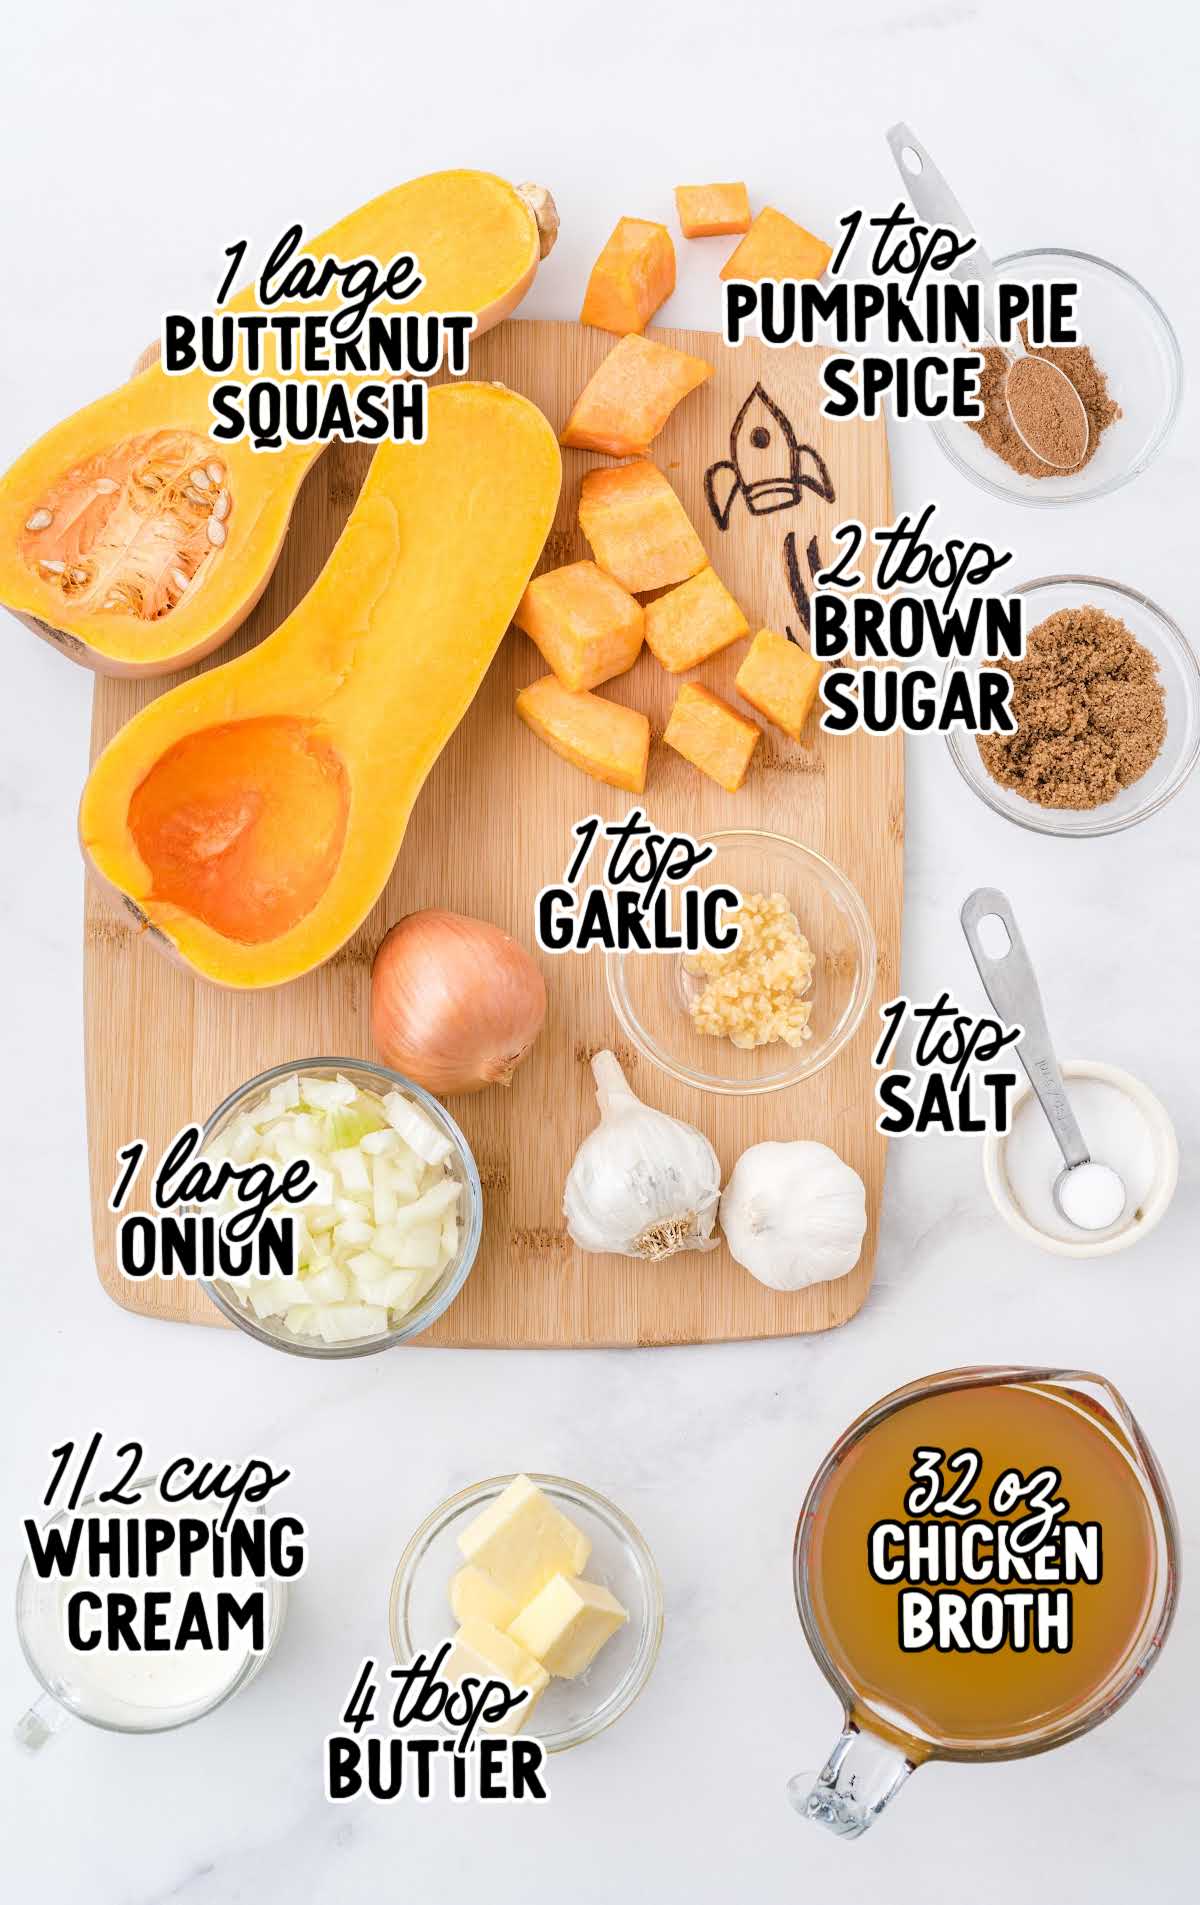 butternut squash soup raw ingredients that are labeled